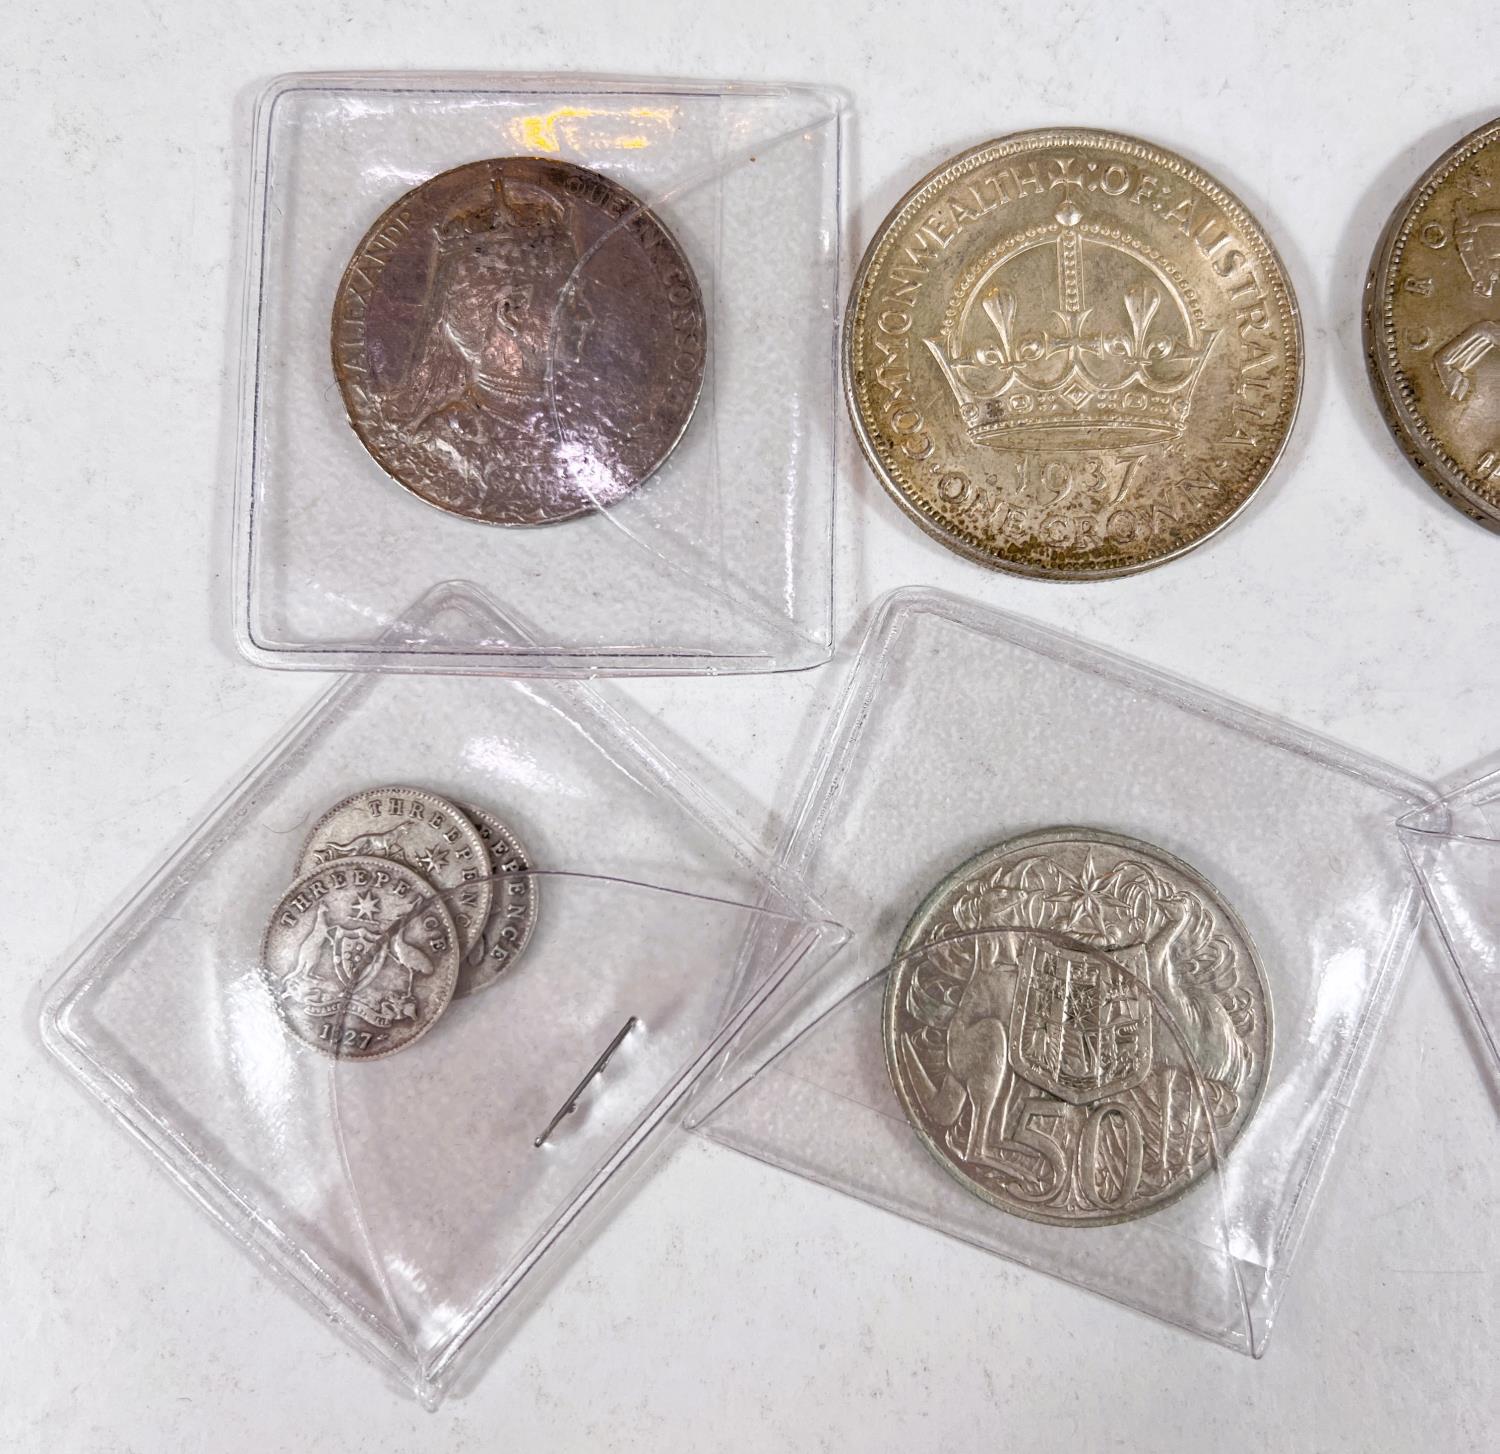 GB and Australian silver coins and a 1902 coronation medal - Image 3 of 4